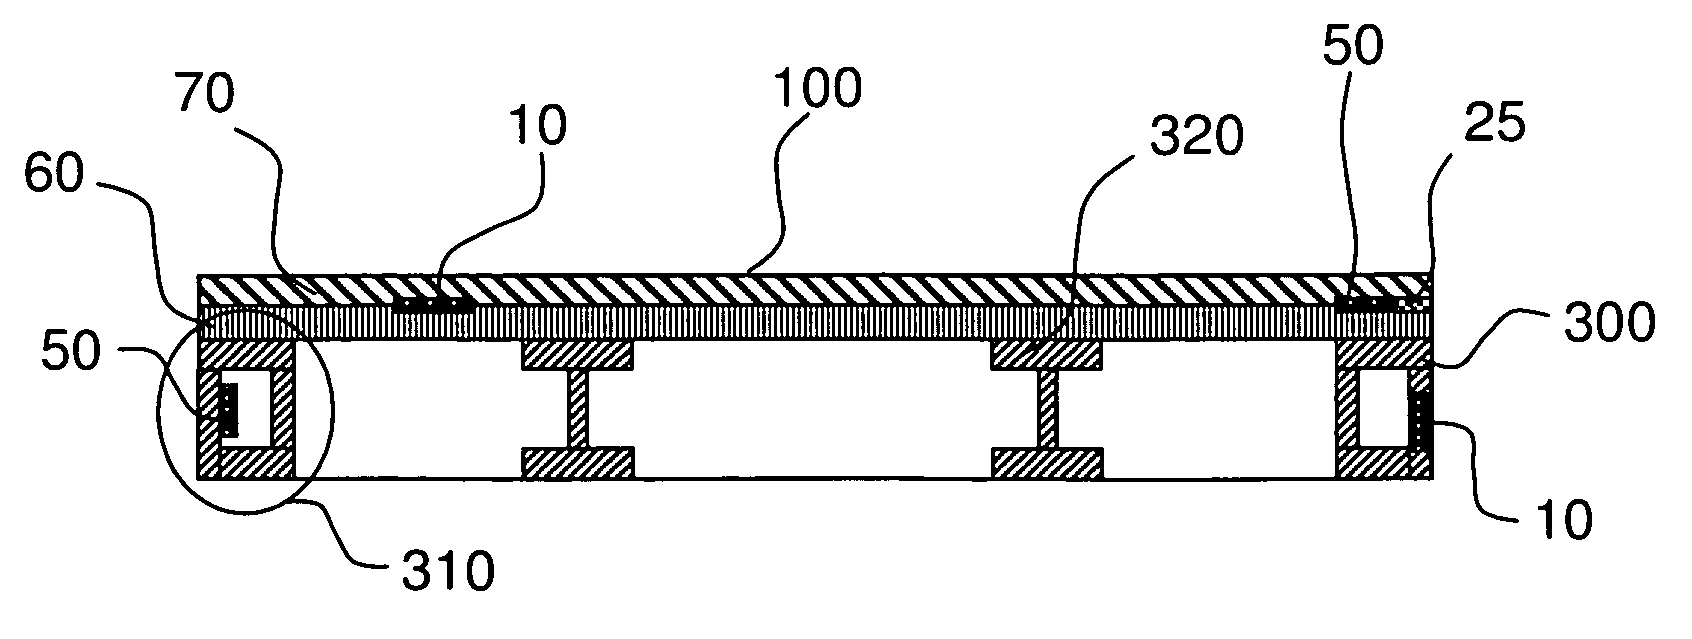 Formwork panel with frame containing an electronic identification element